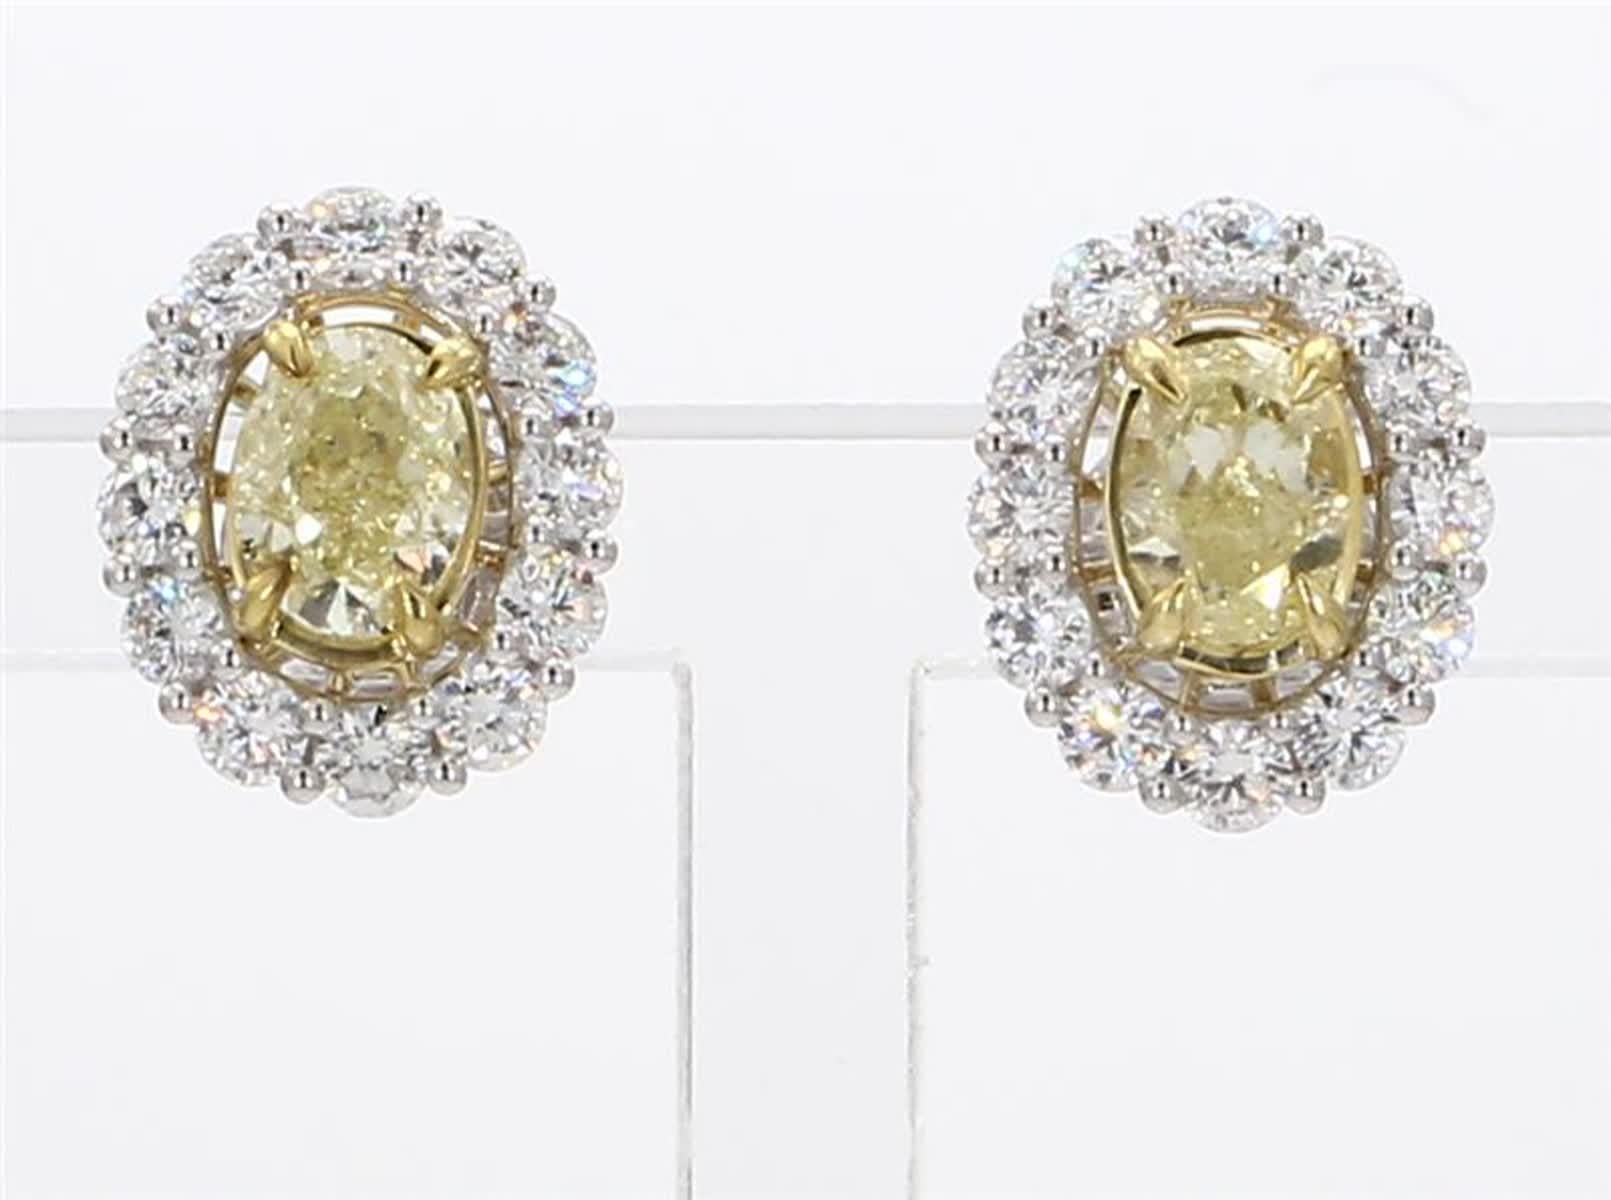 RareGemWorld's classic natural oval cut yellow diamond earrings. Mounted in a beautiful 18K Yellow and White Gold setting with natural oval cut yellow diamonds. The yellow diamonds are surrounded by a halo of small round natural white diamond melee.